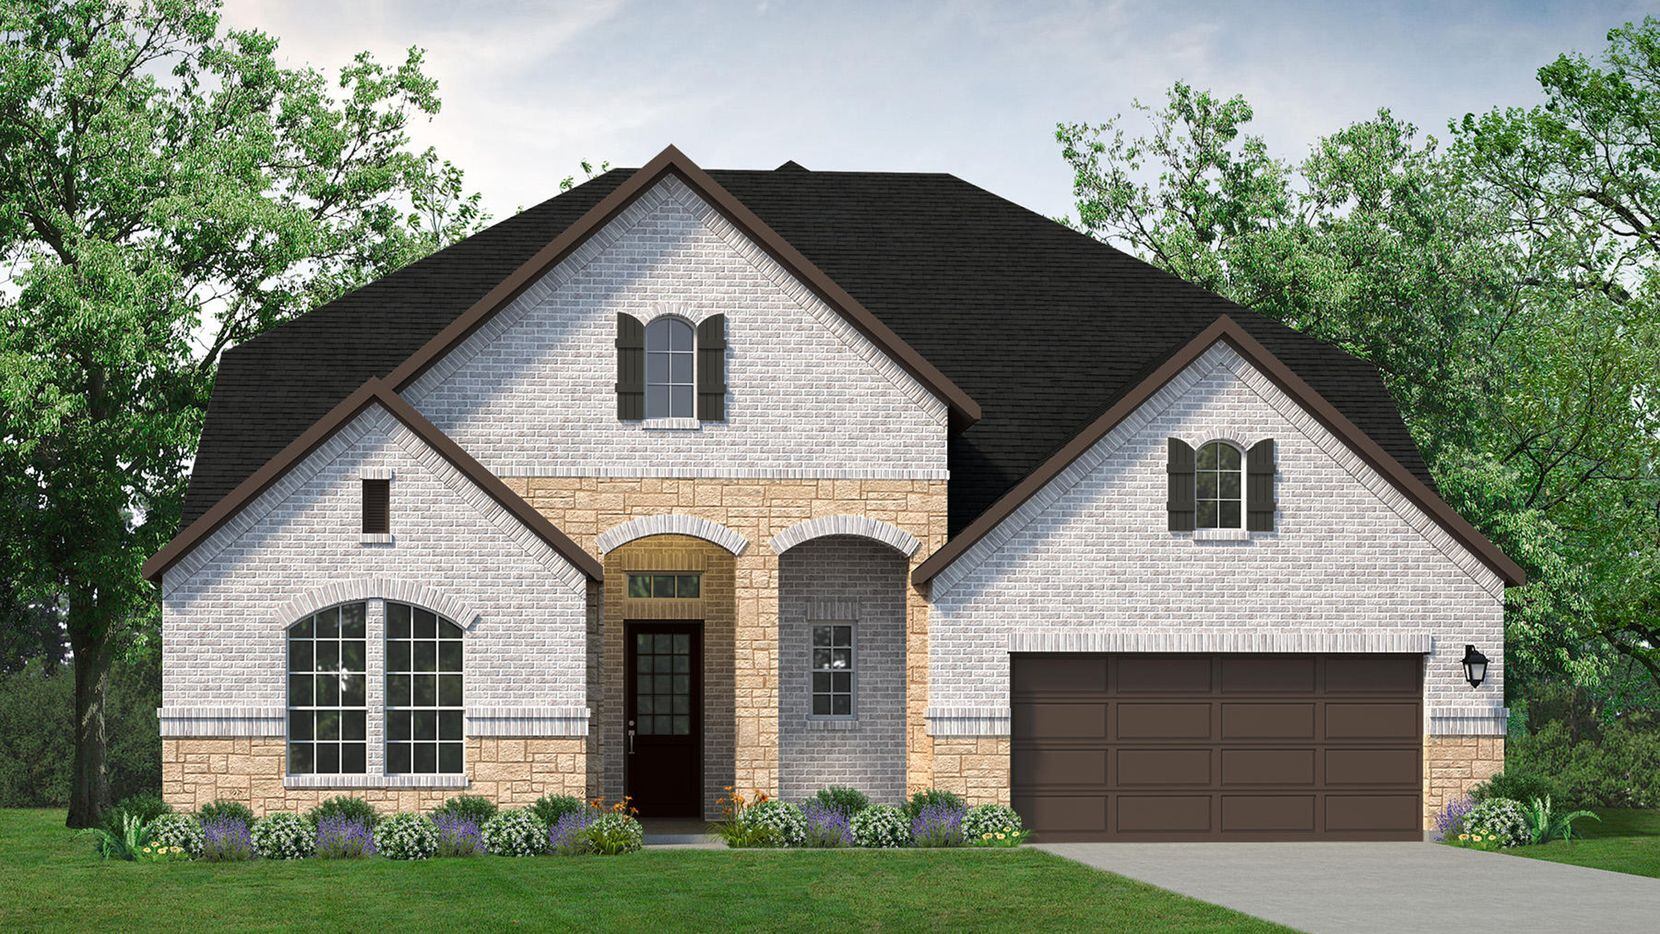 UnionMain Homes’ Grayson floor plan at 2290 Winecup in Prosper’s Hills at Legacy will be...